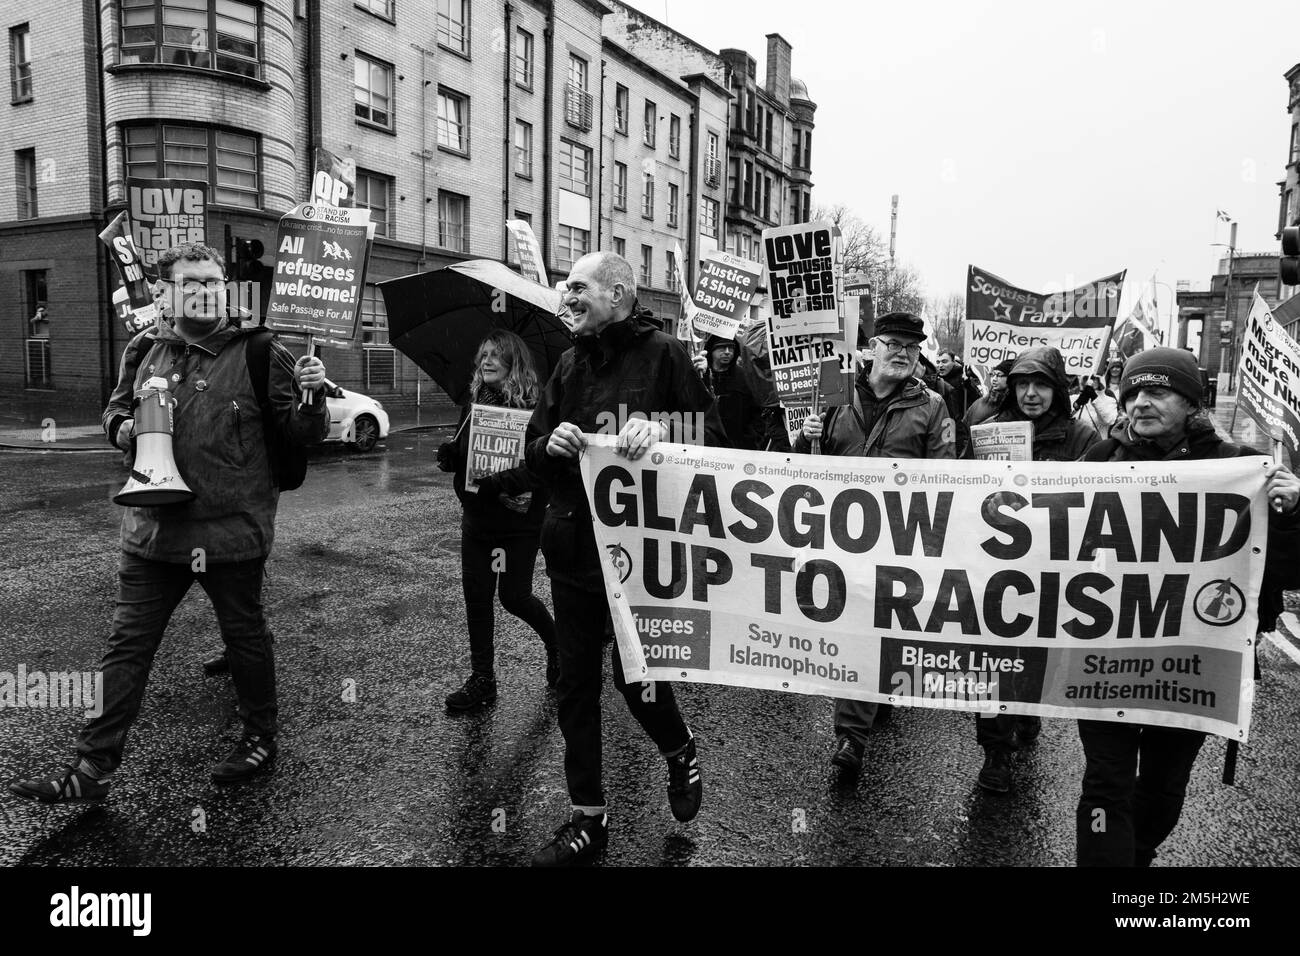 These images are from the Scottish Trades Union Congress St Andrews Day Anti Racism march which took place from Glasgow Green to Bath Street Stock Photo